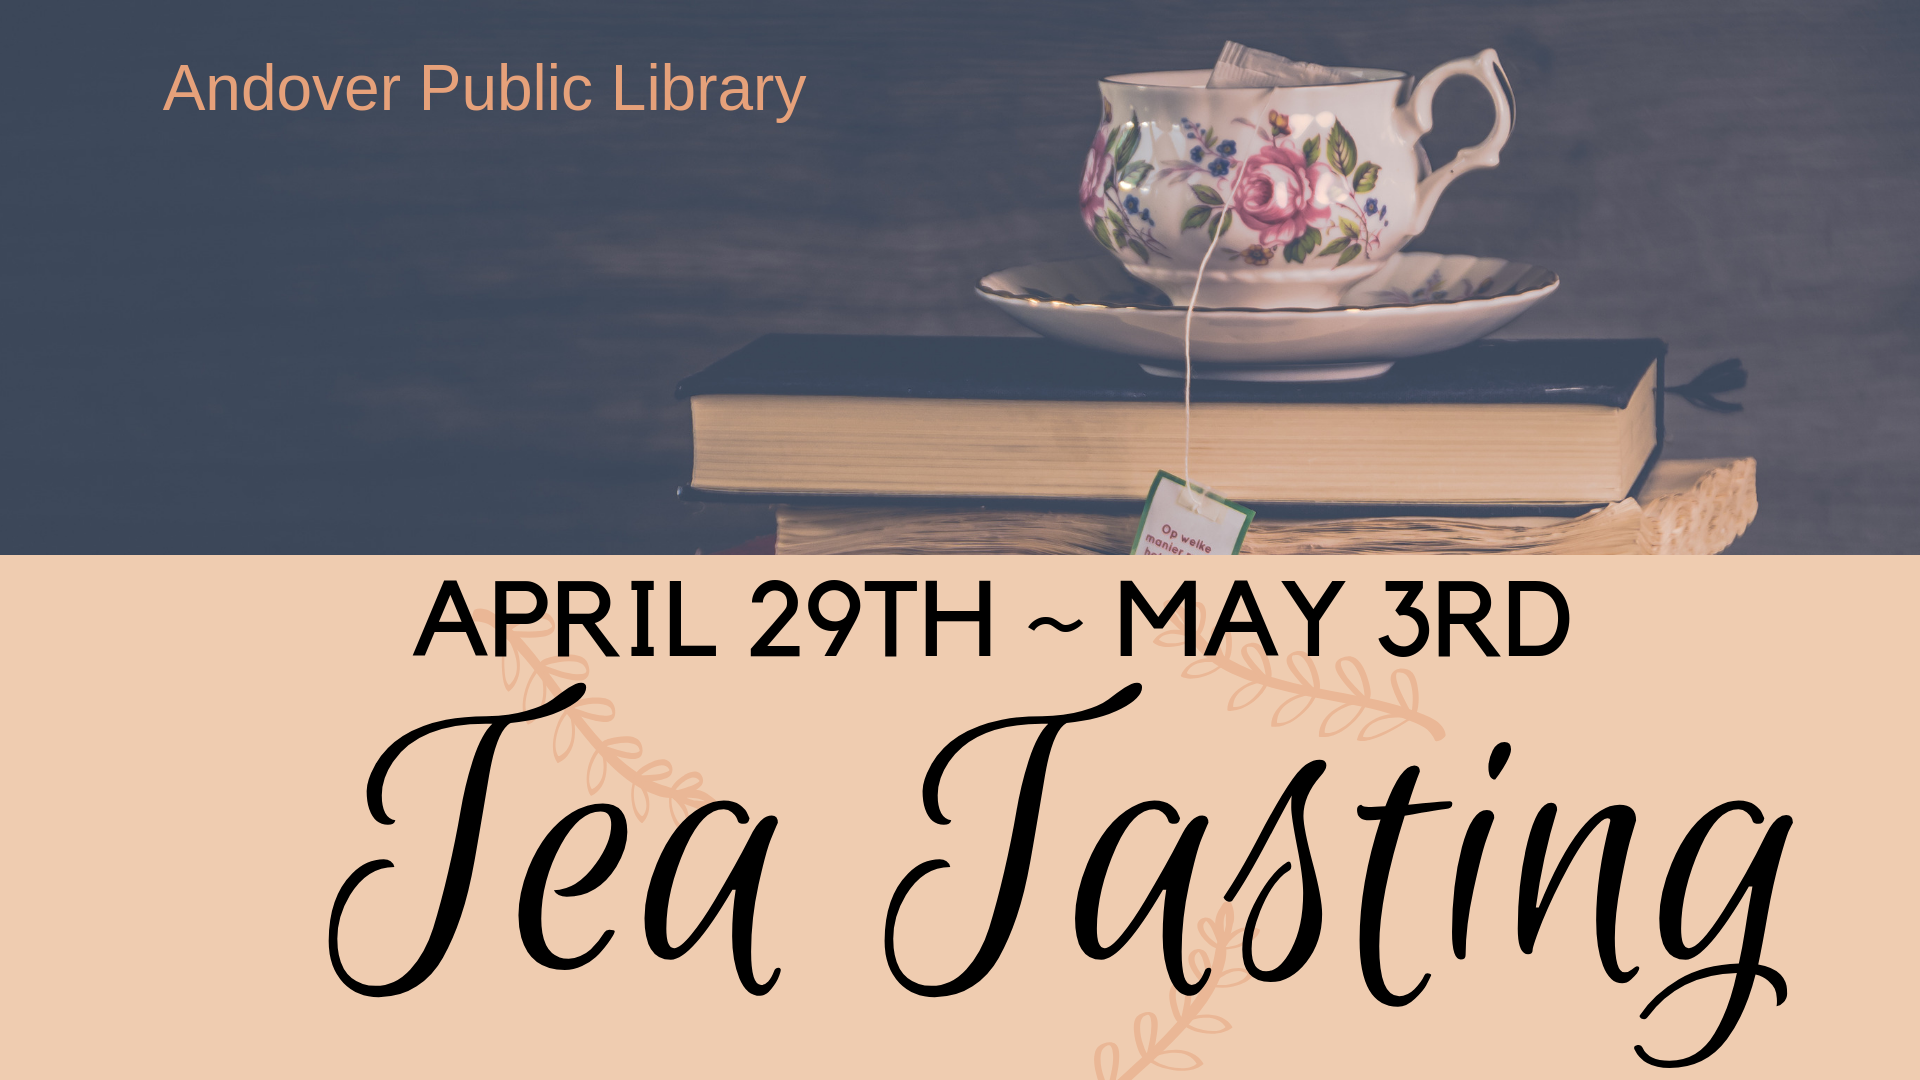 Tea Tasting in the Library